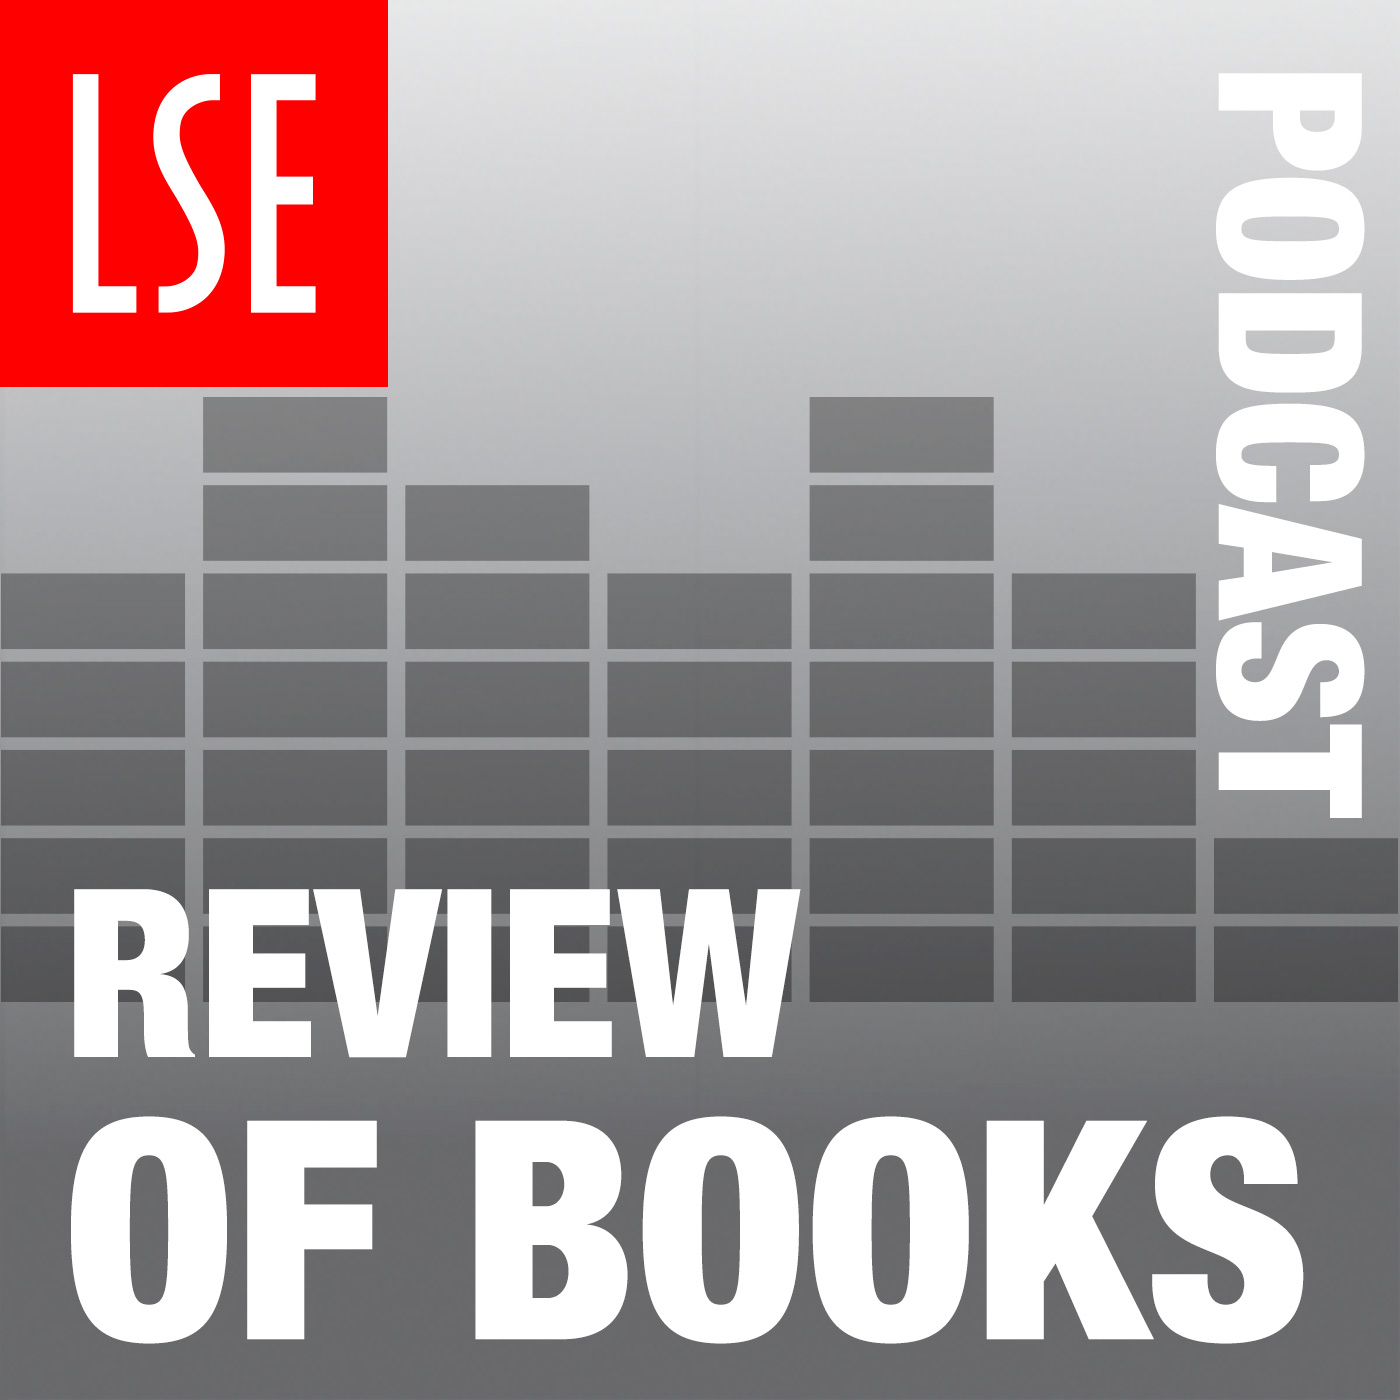 LSE Review of Books Podcast artwork